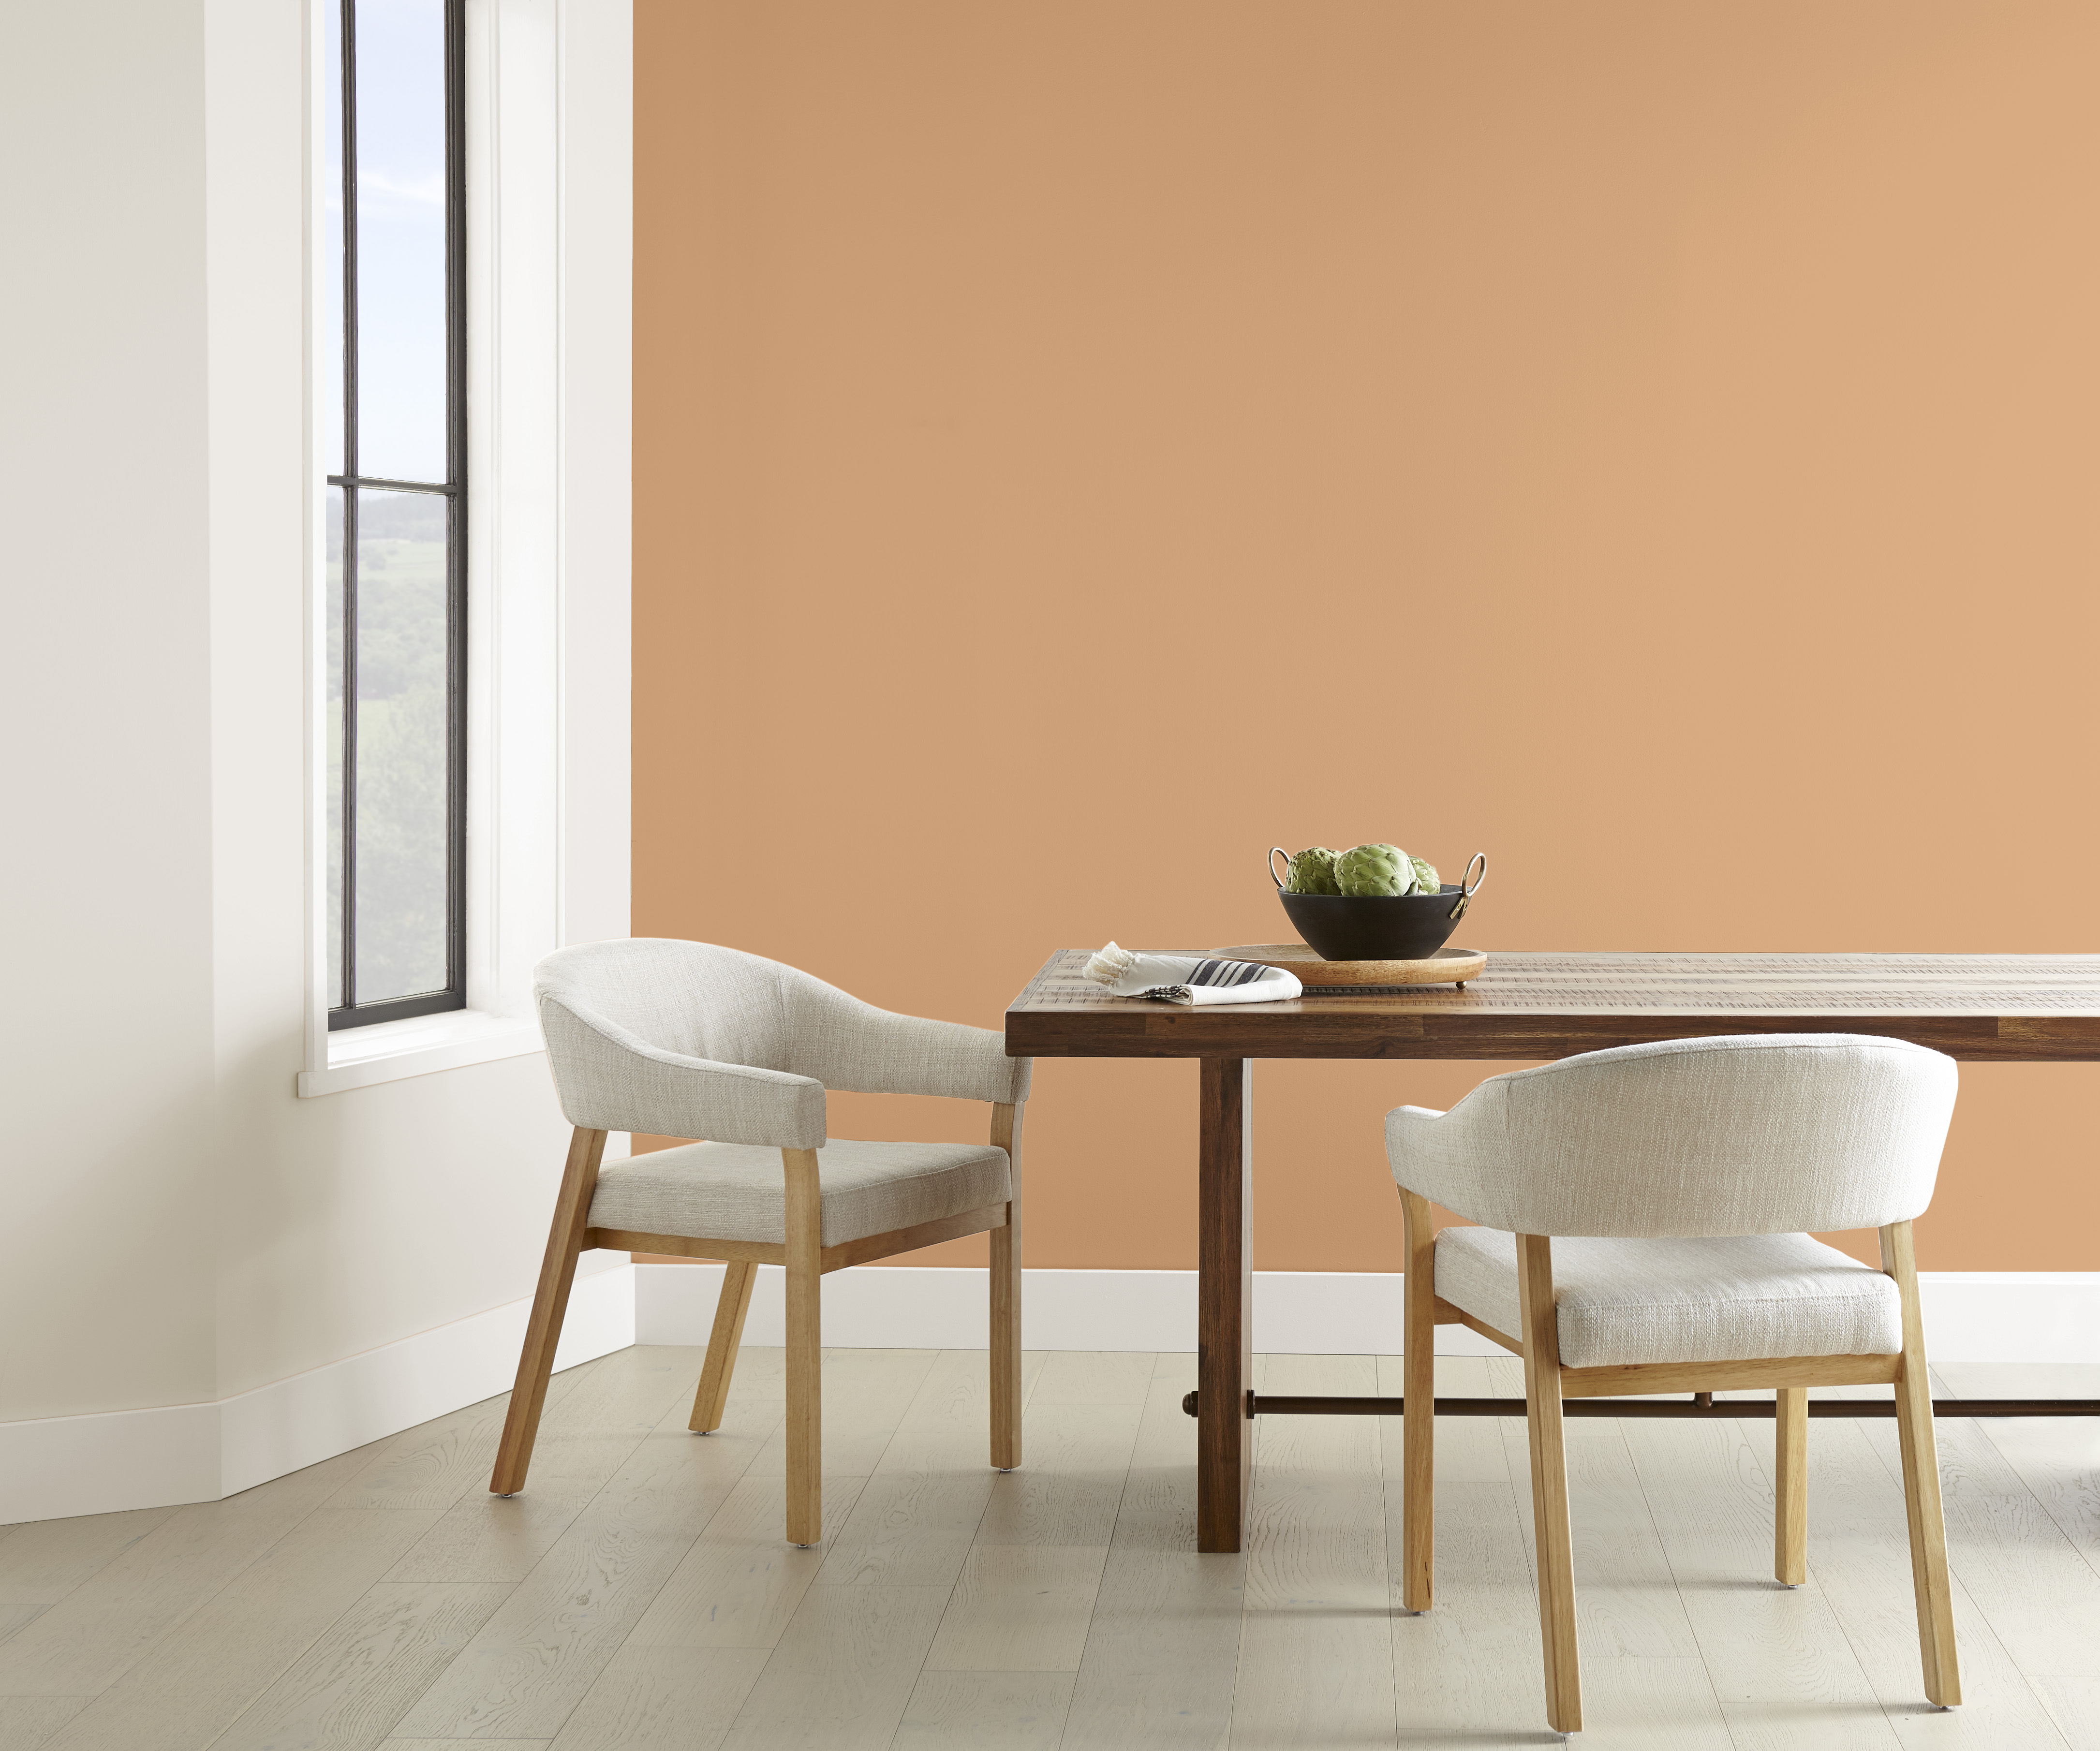 A minimalistic dining space with an accent wall painted in a light golden-brown colour